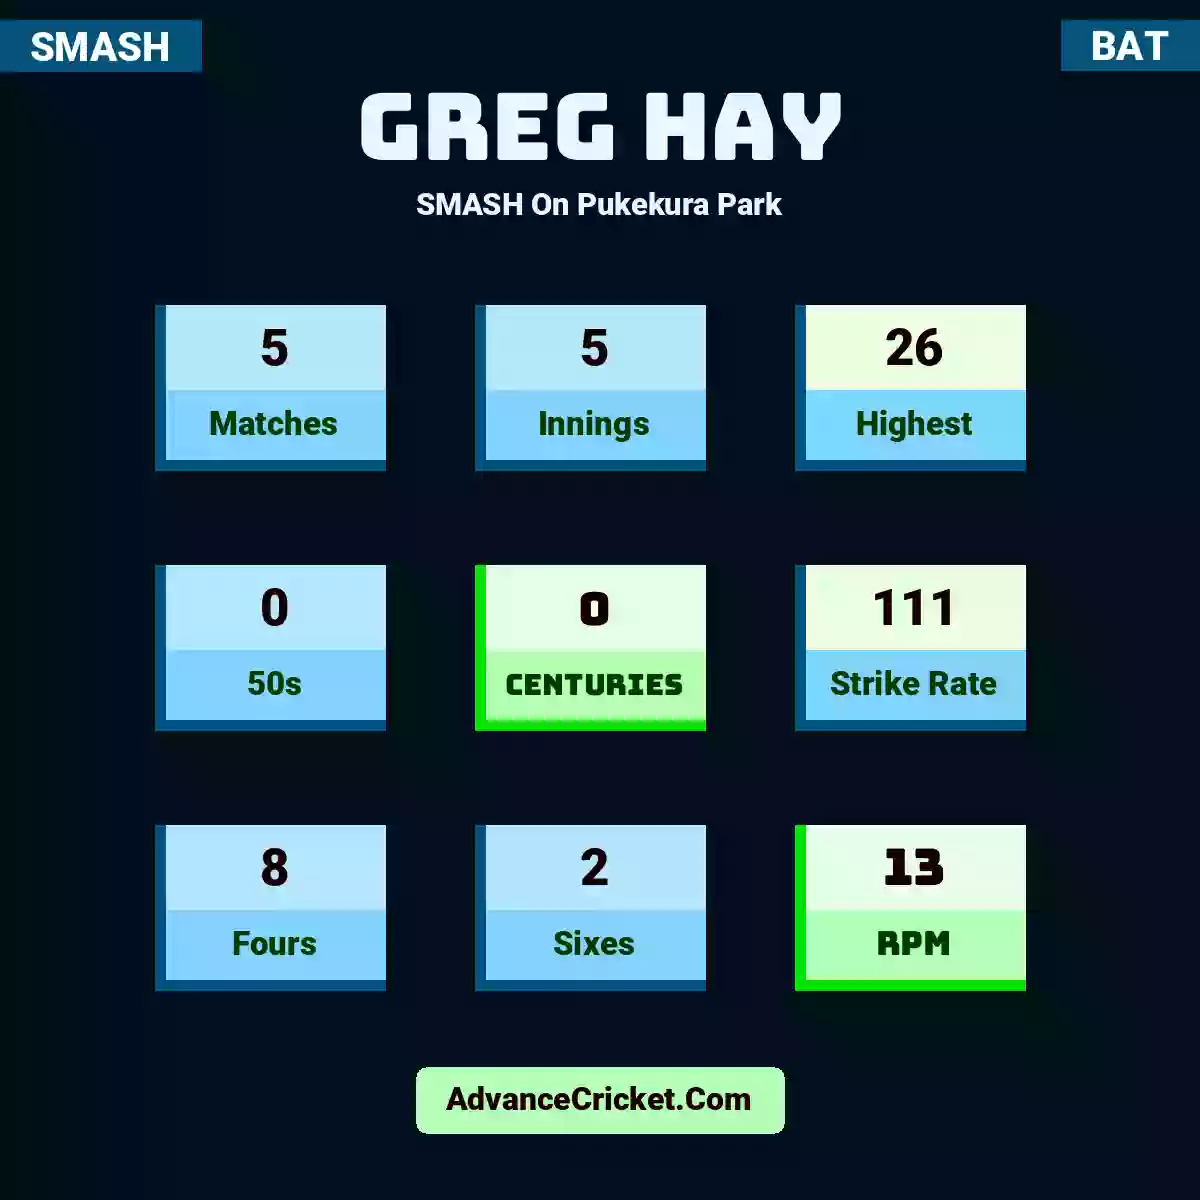 Greg Hay SMASH  On Pukekura Park, Greg Hay played 5 matches, scored 26 runs as highest, 0 half-centuries, and 0 centuries, with a strike rate of 111. G.Hay hit 8 fours and 2 sixes, with an RPM of 13.